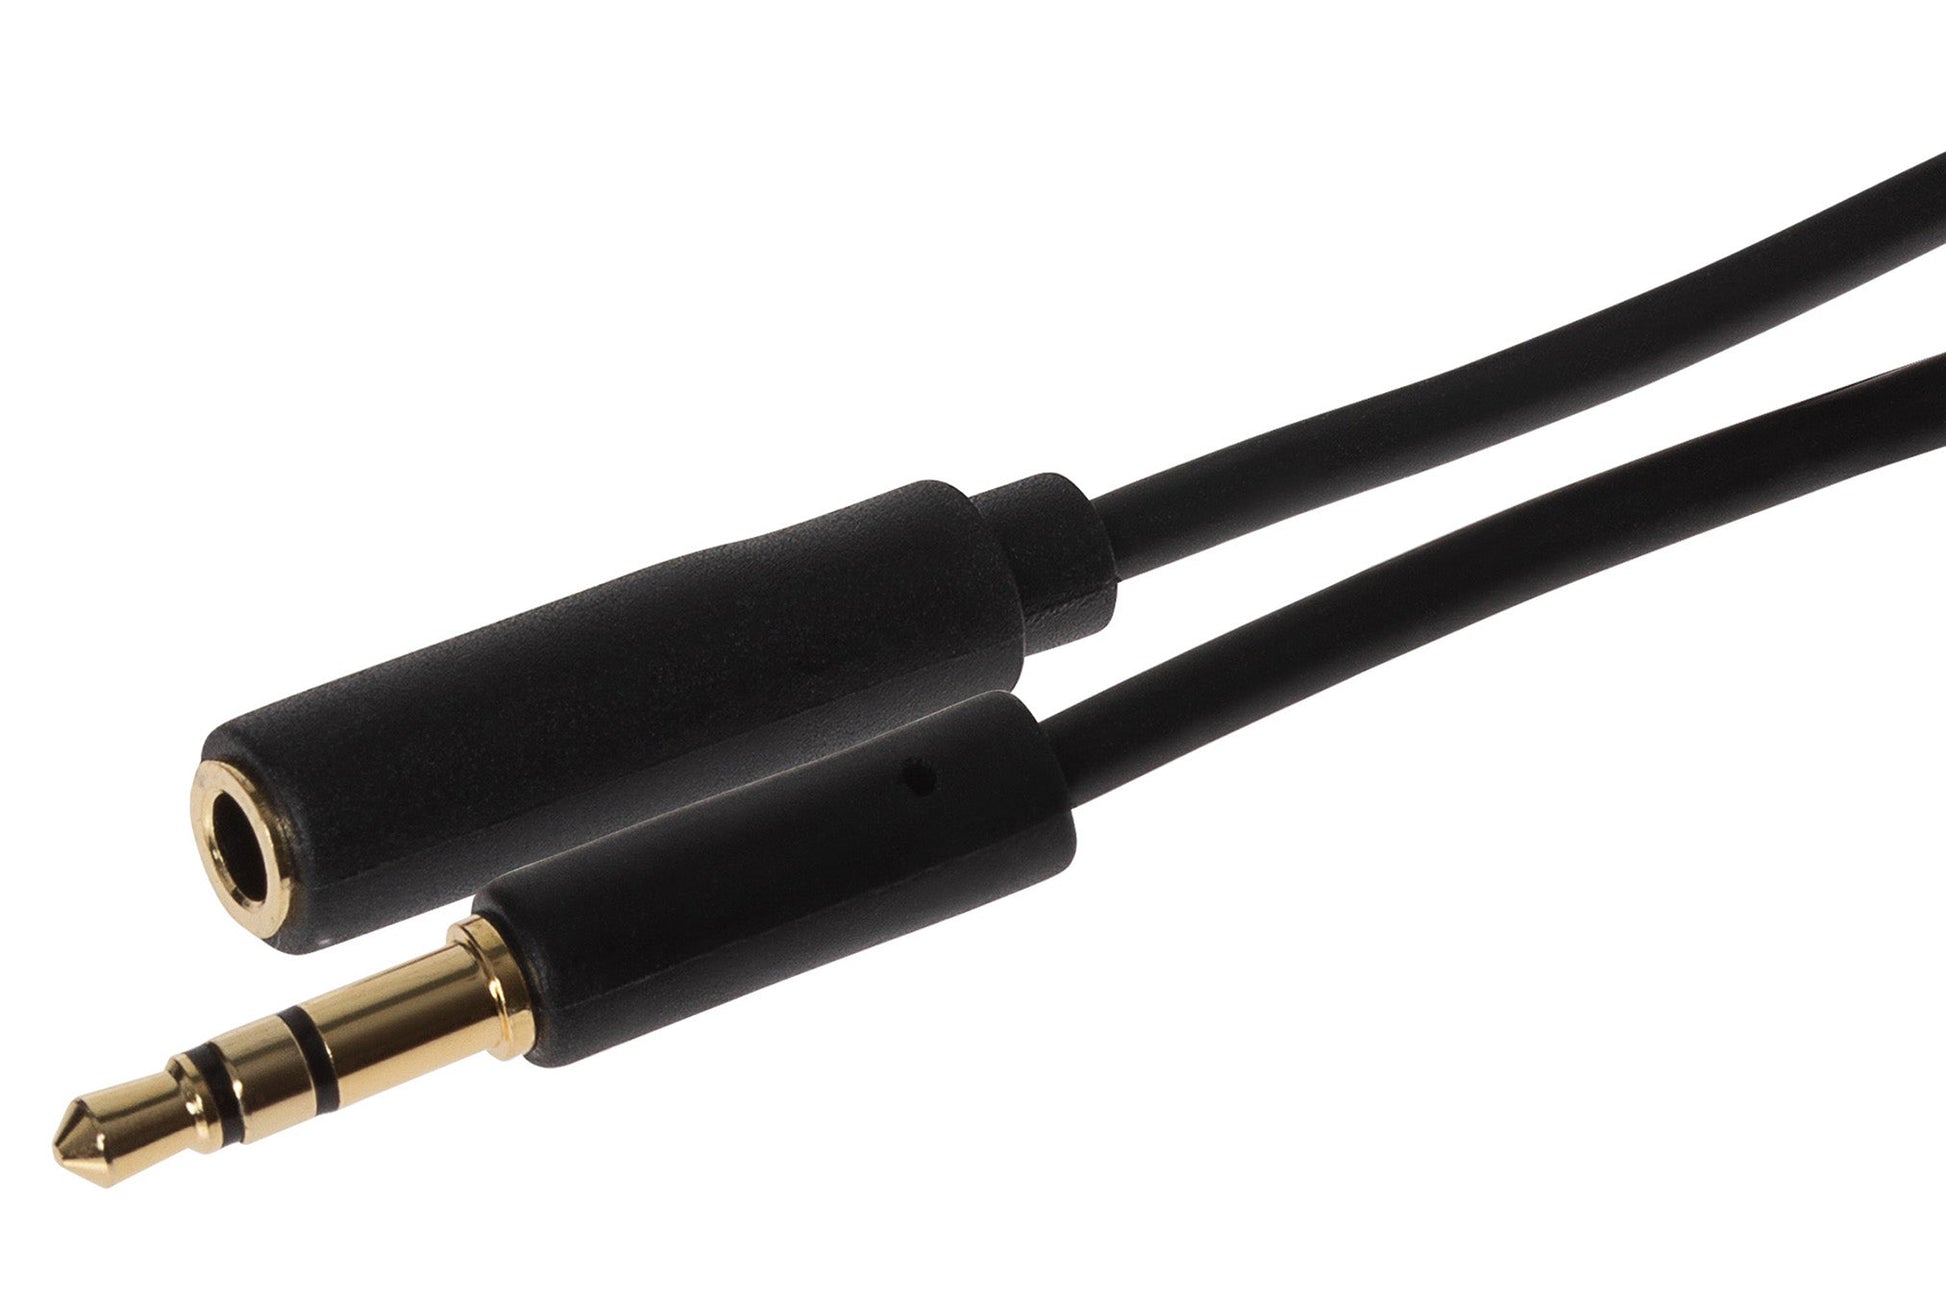 Maplin 3.5mm Aux Stereo 3 Pole TRS Jack Plug to 3.5mm Female Jack Plug Extension Cable - Black - maplin.co.uk